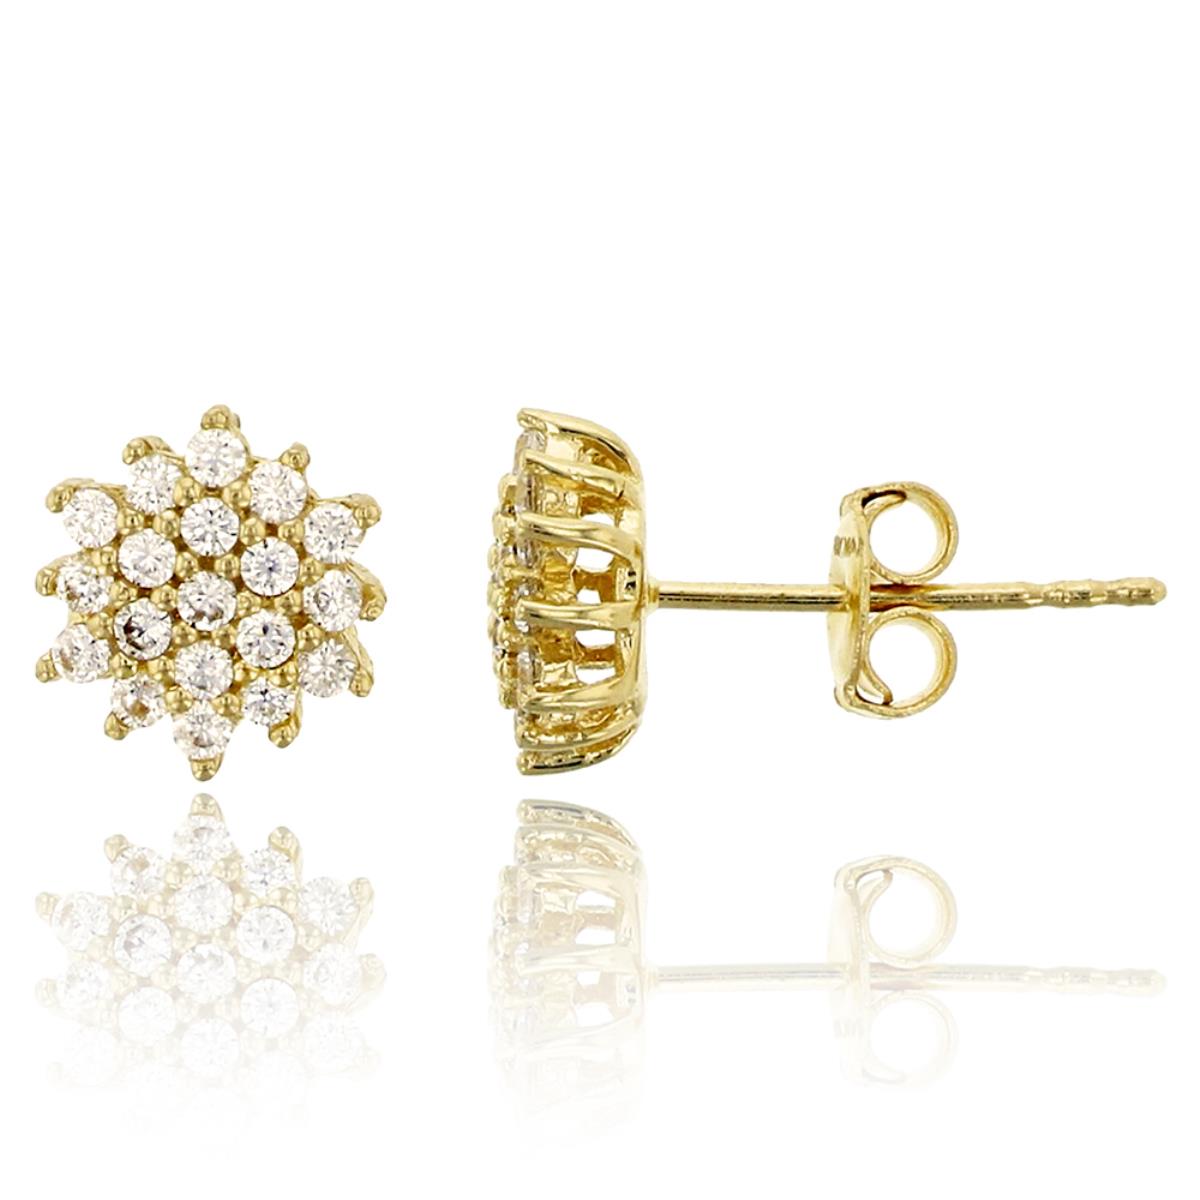 14K Yellow Gold Micropave Flower Stud Earring with Clutch Back